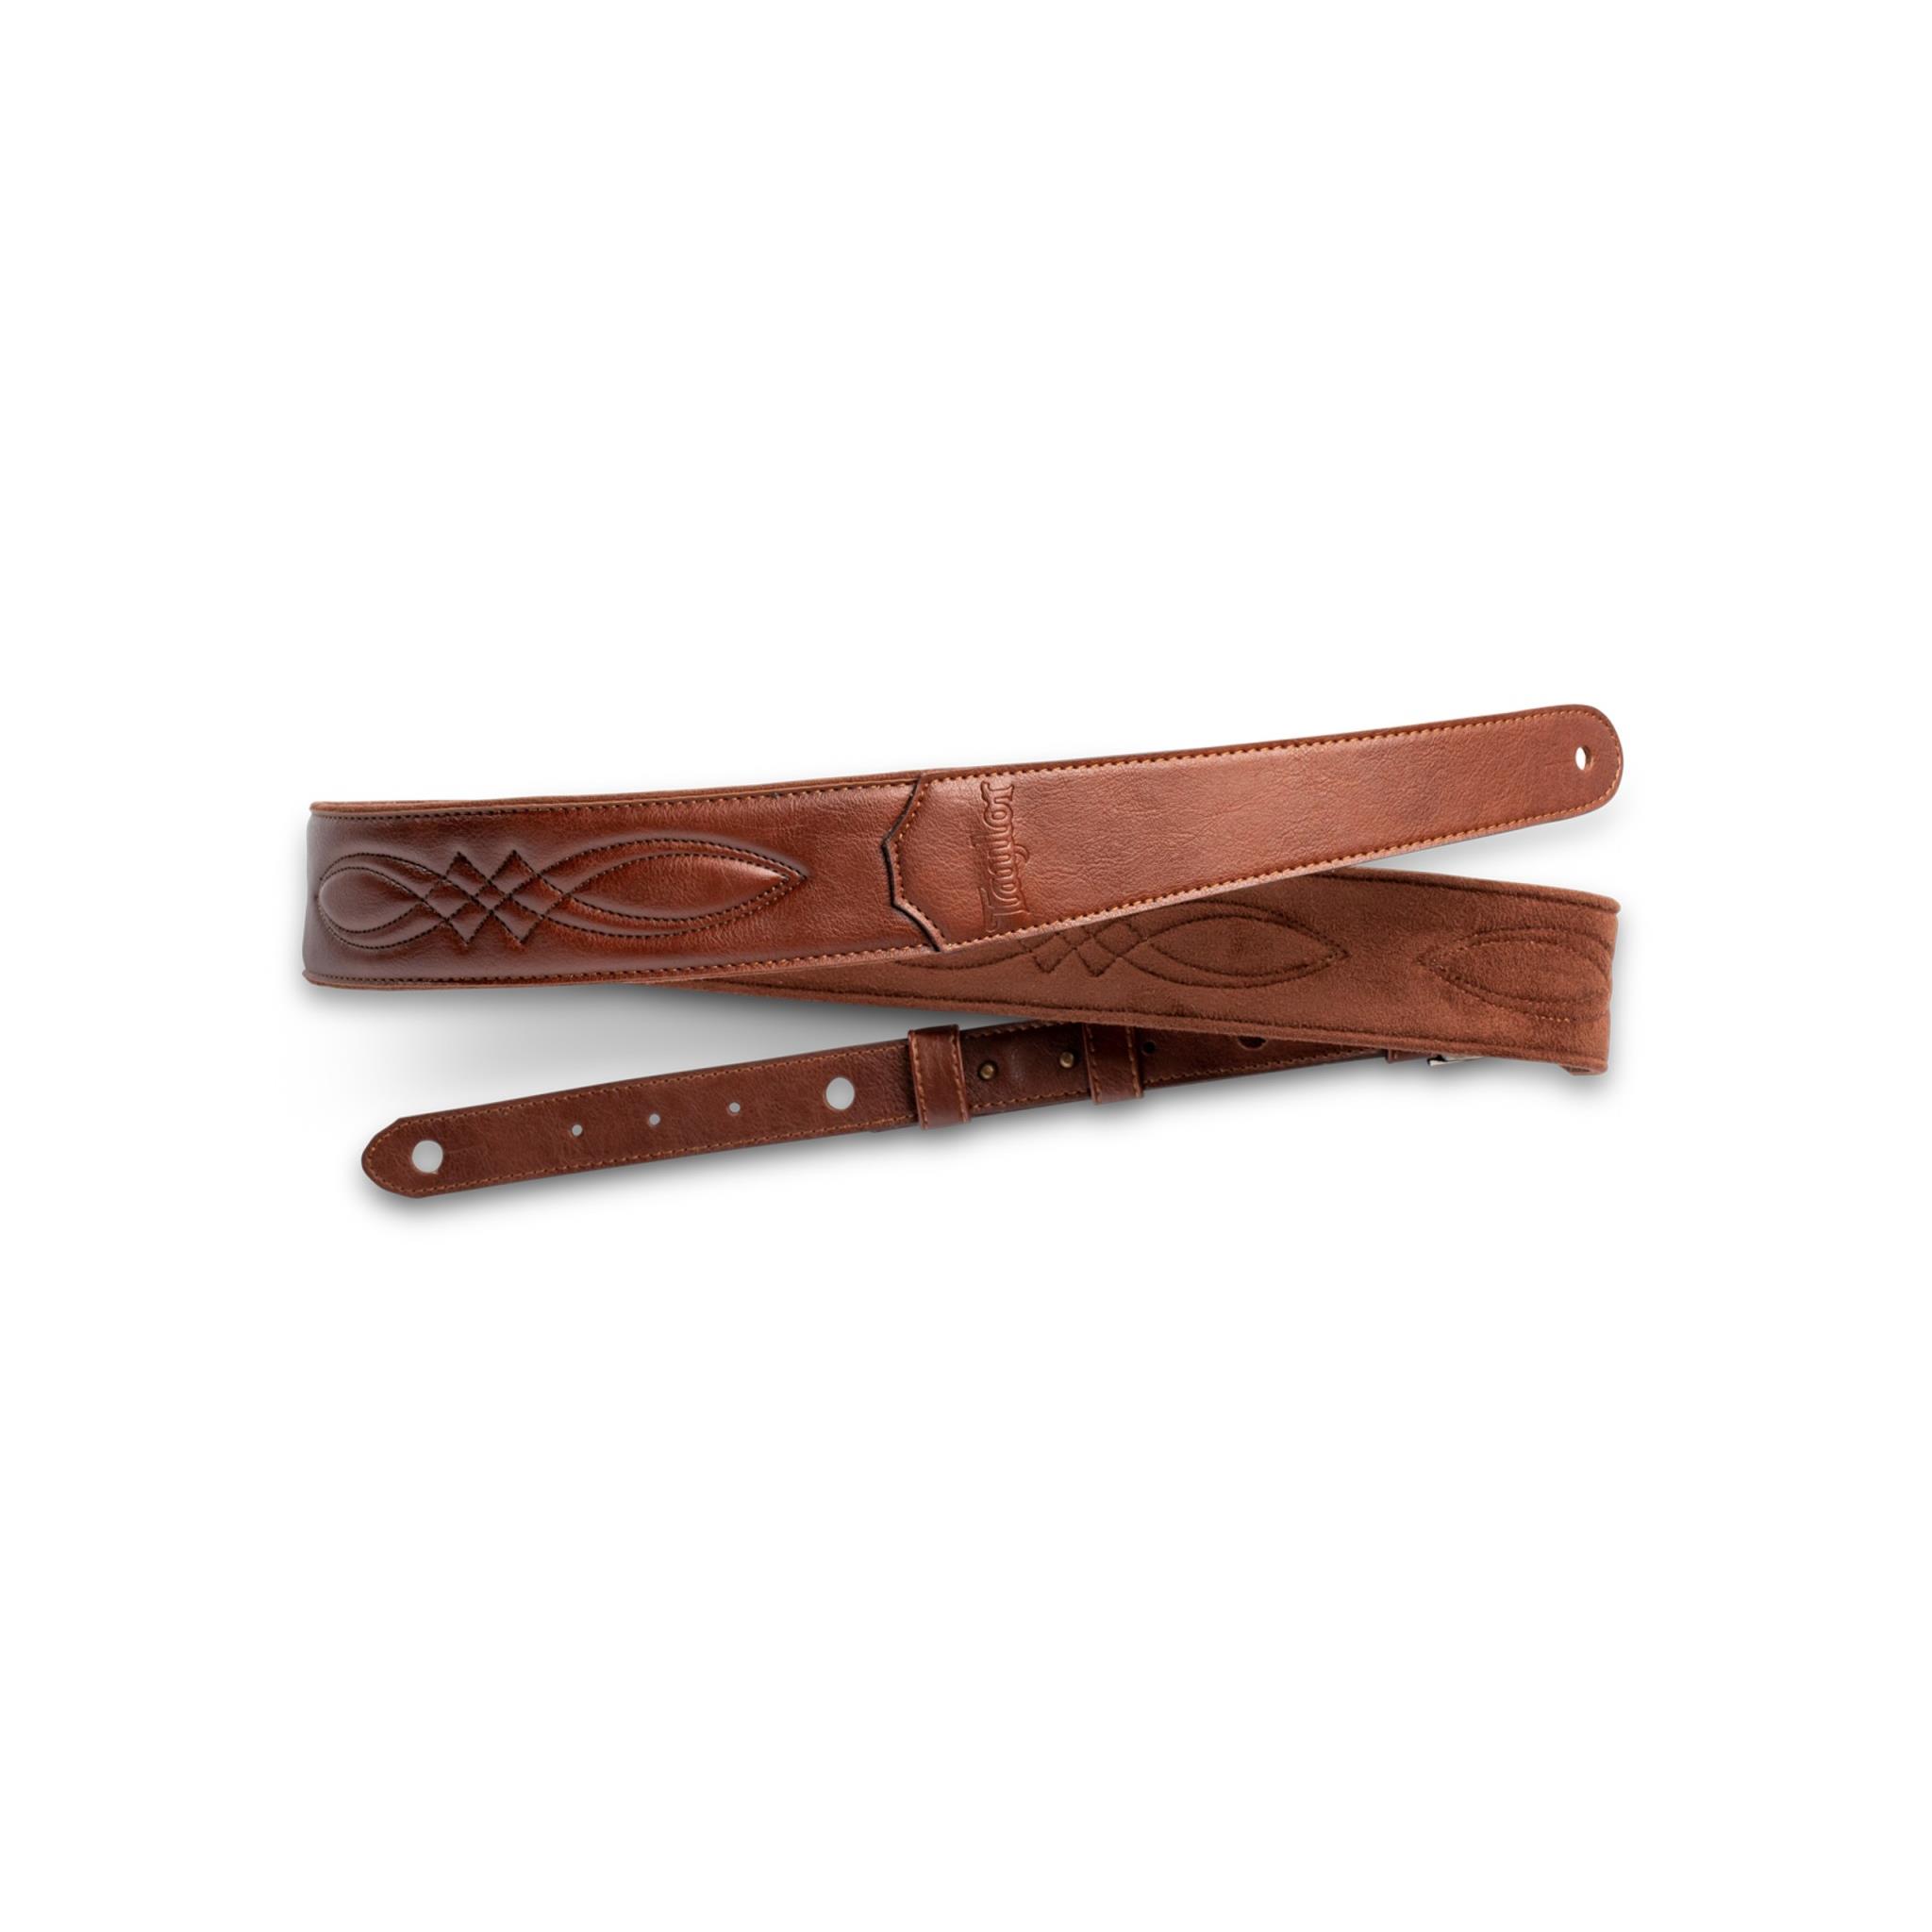 Taylor Vegan Leather Strap,Med Brown w/Stitching 2.0",Embossed
Logo